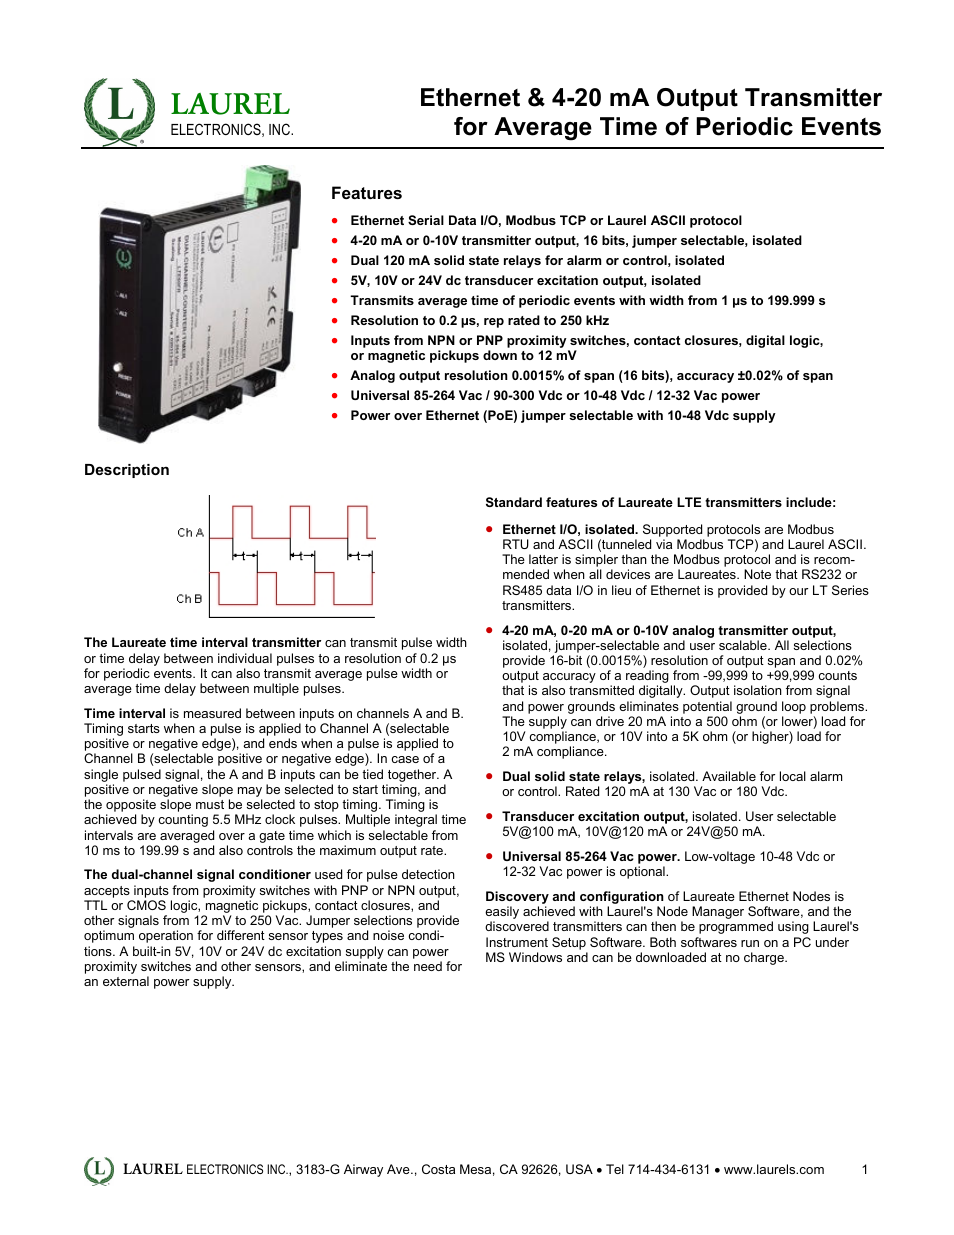 LTE: Ethernet & 4-20 mA Output Transmitter for Average Time of Periodic Events